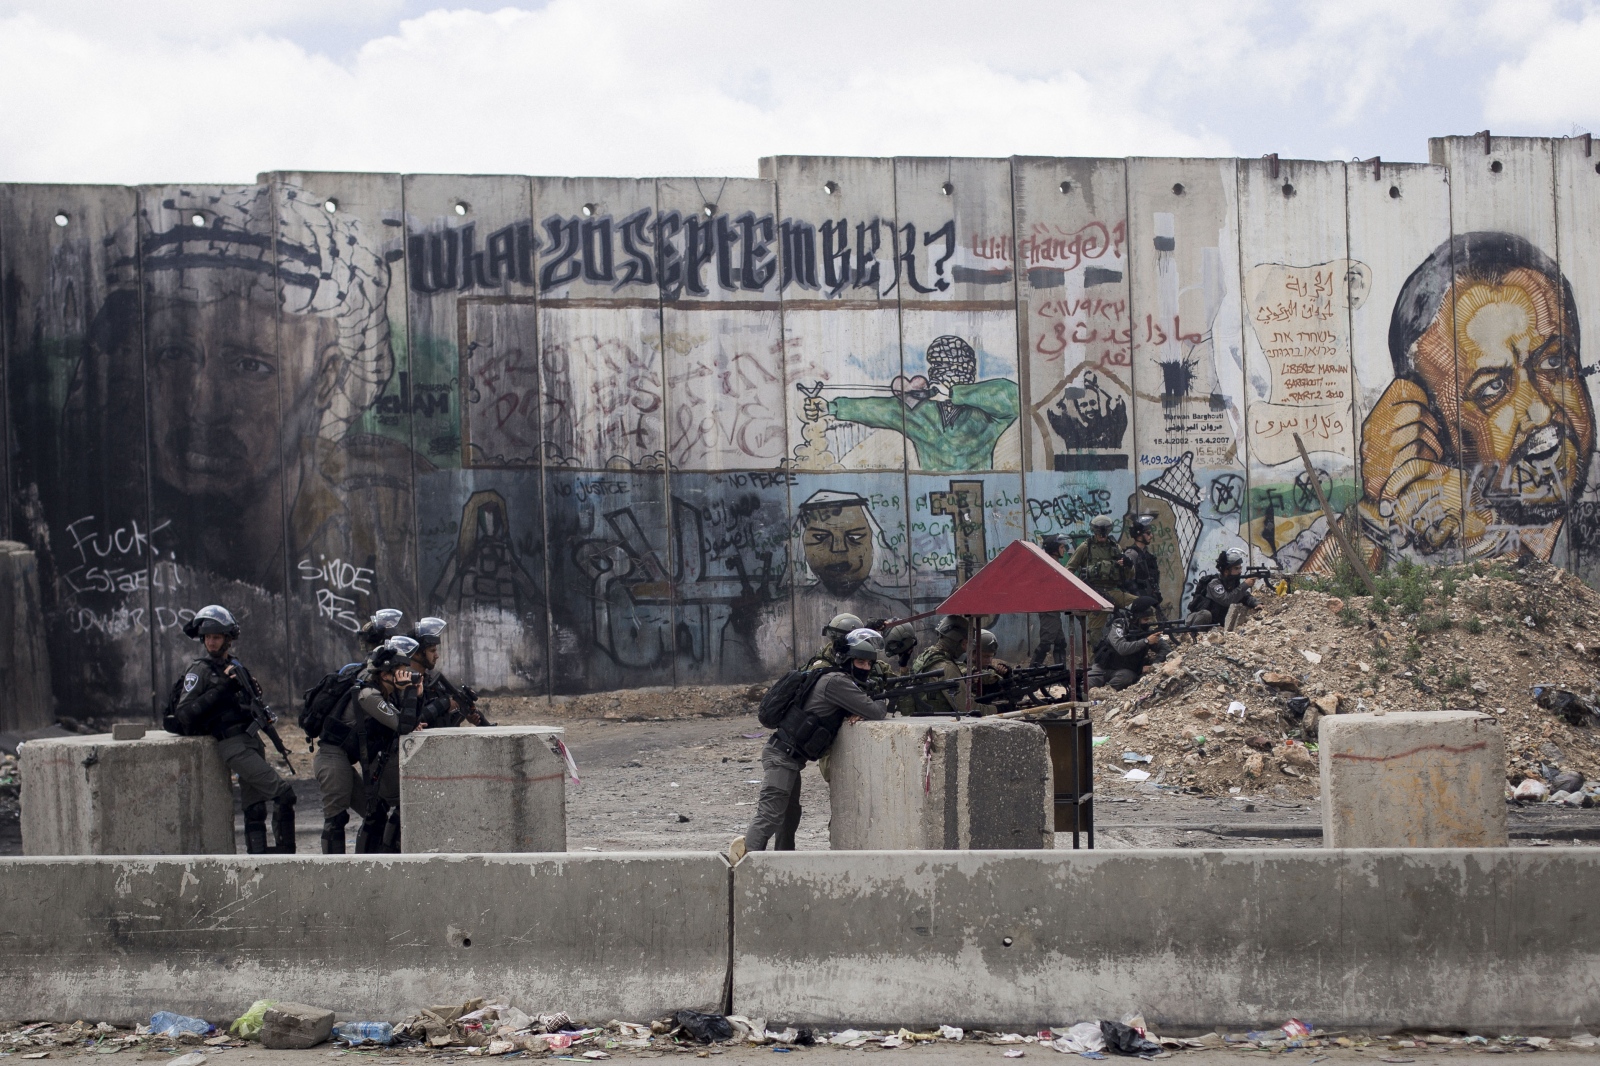 Image from Clashes in Occupied West Bank